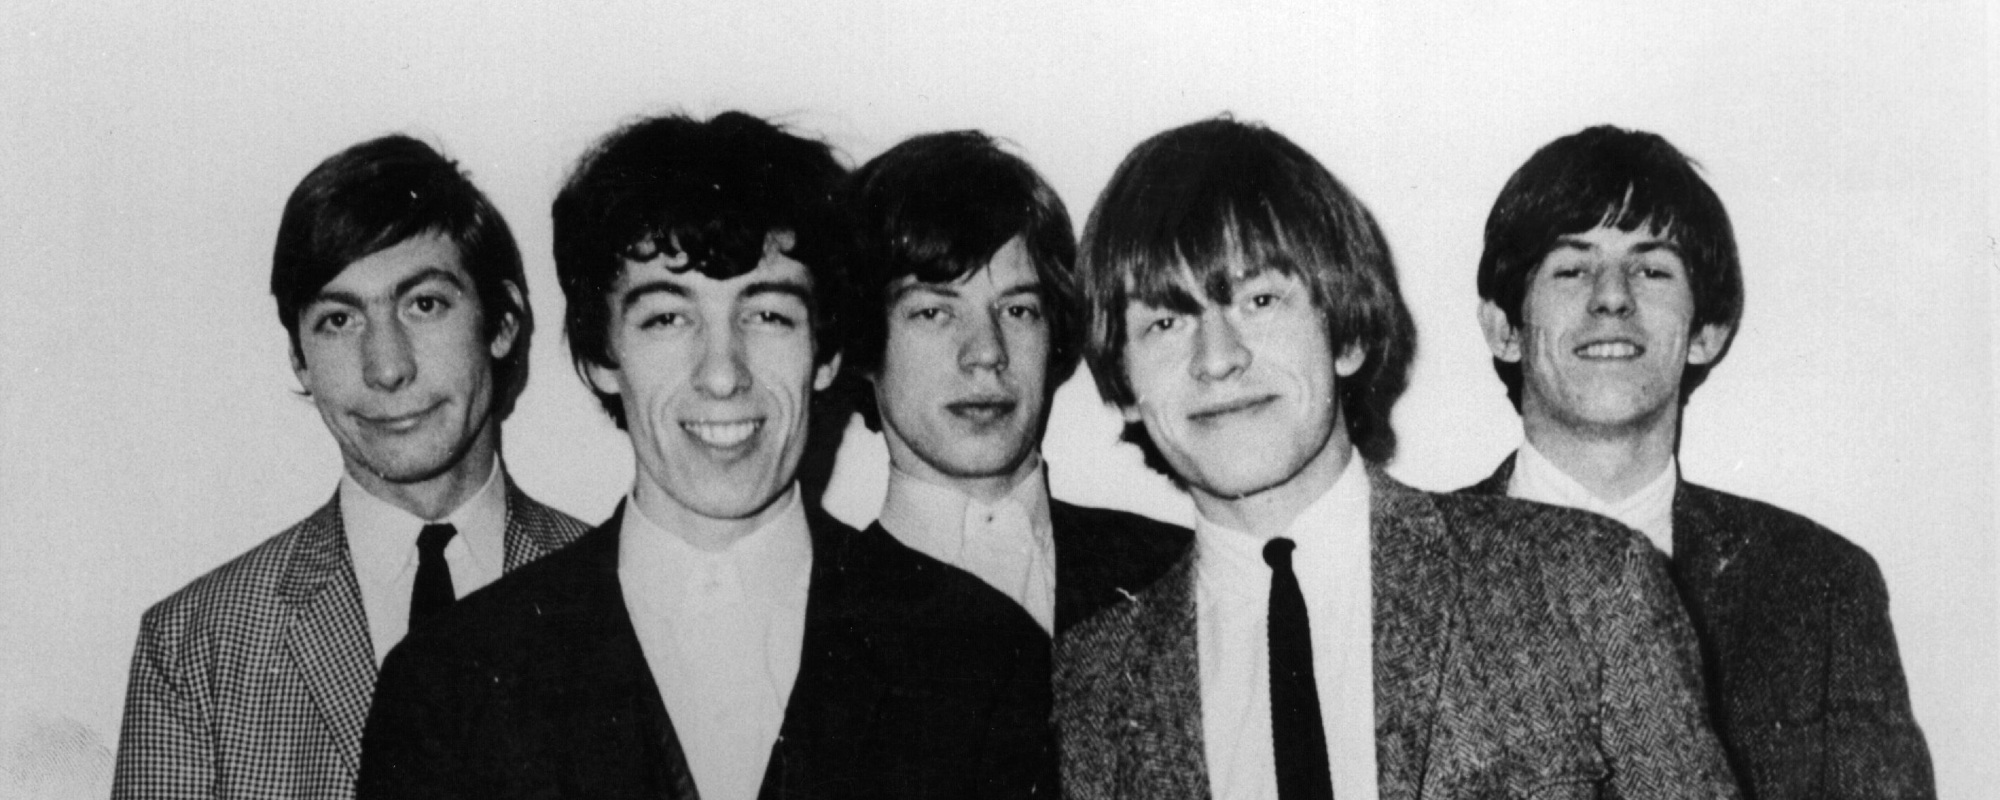 The Origin Story of the Rolling Stones